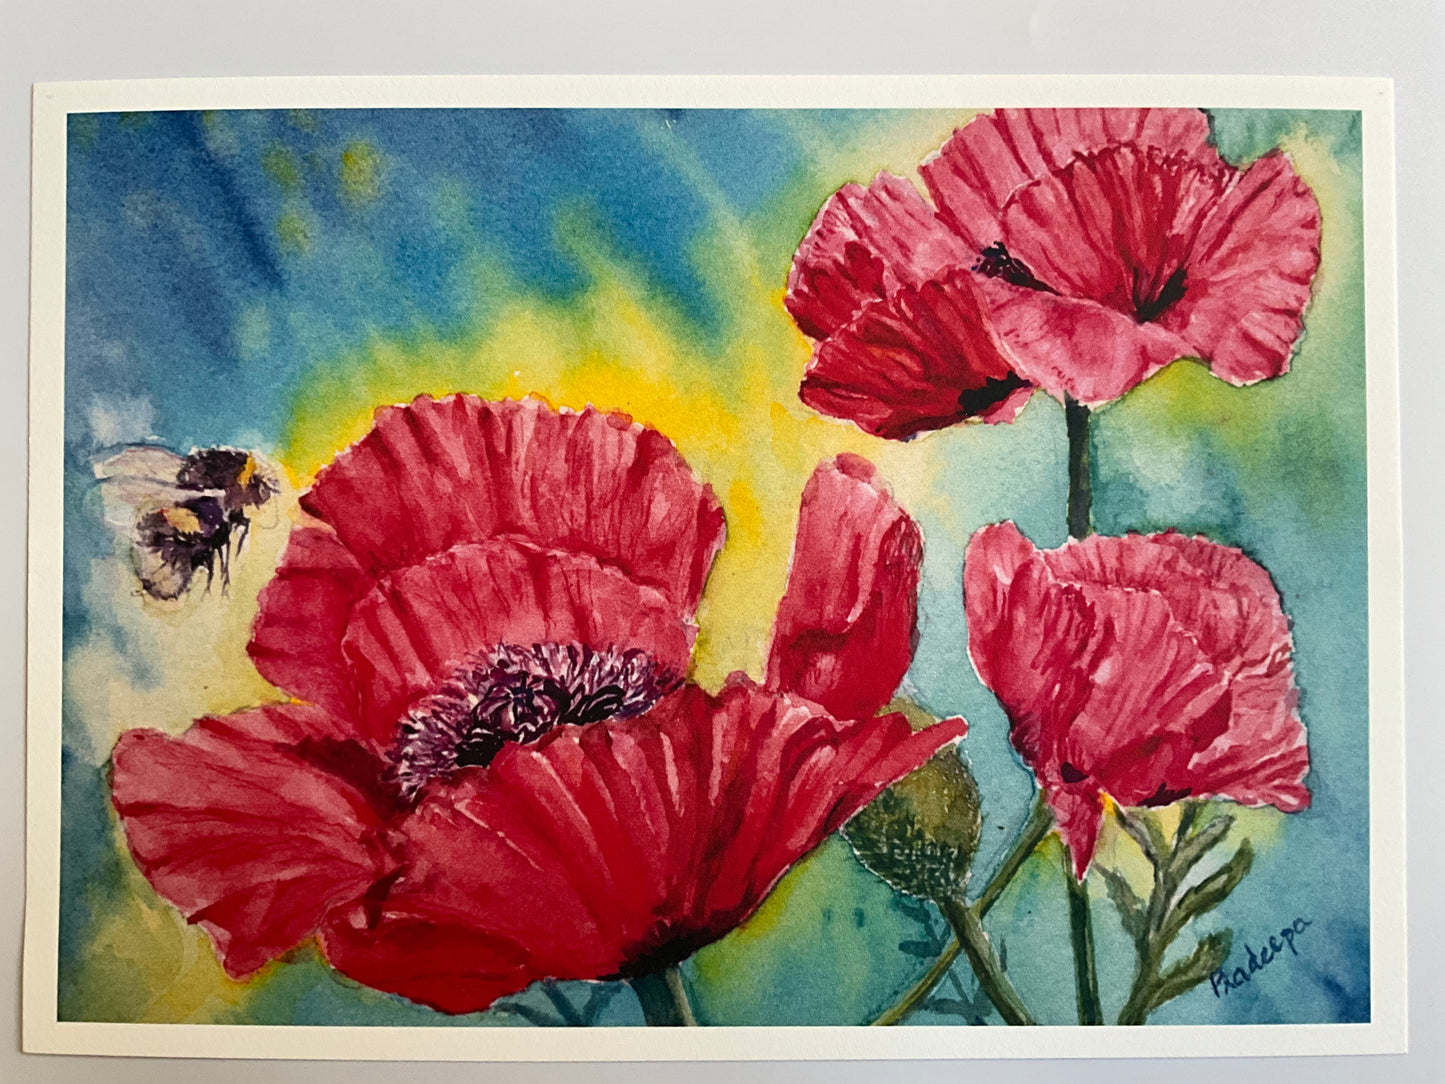 Delicious Poppies - Limited edition print